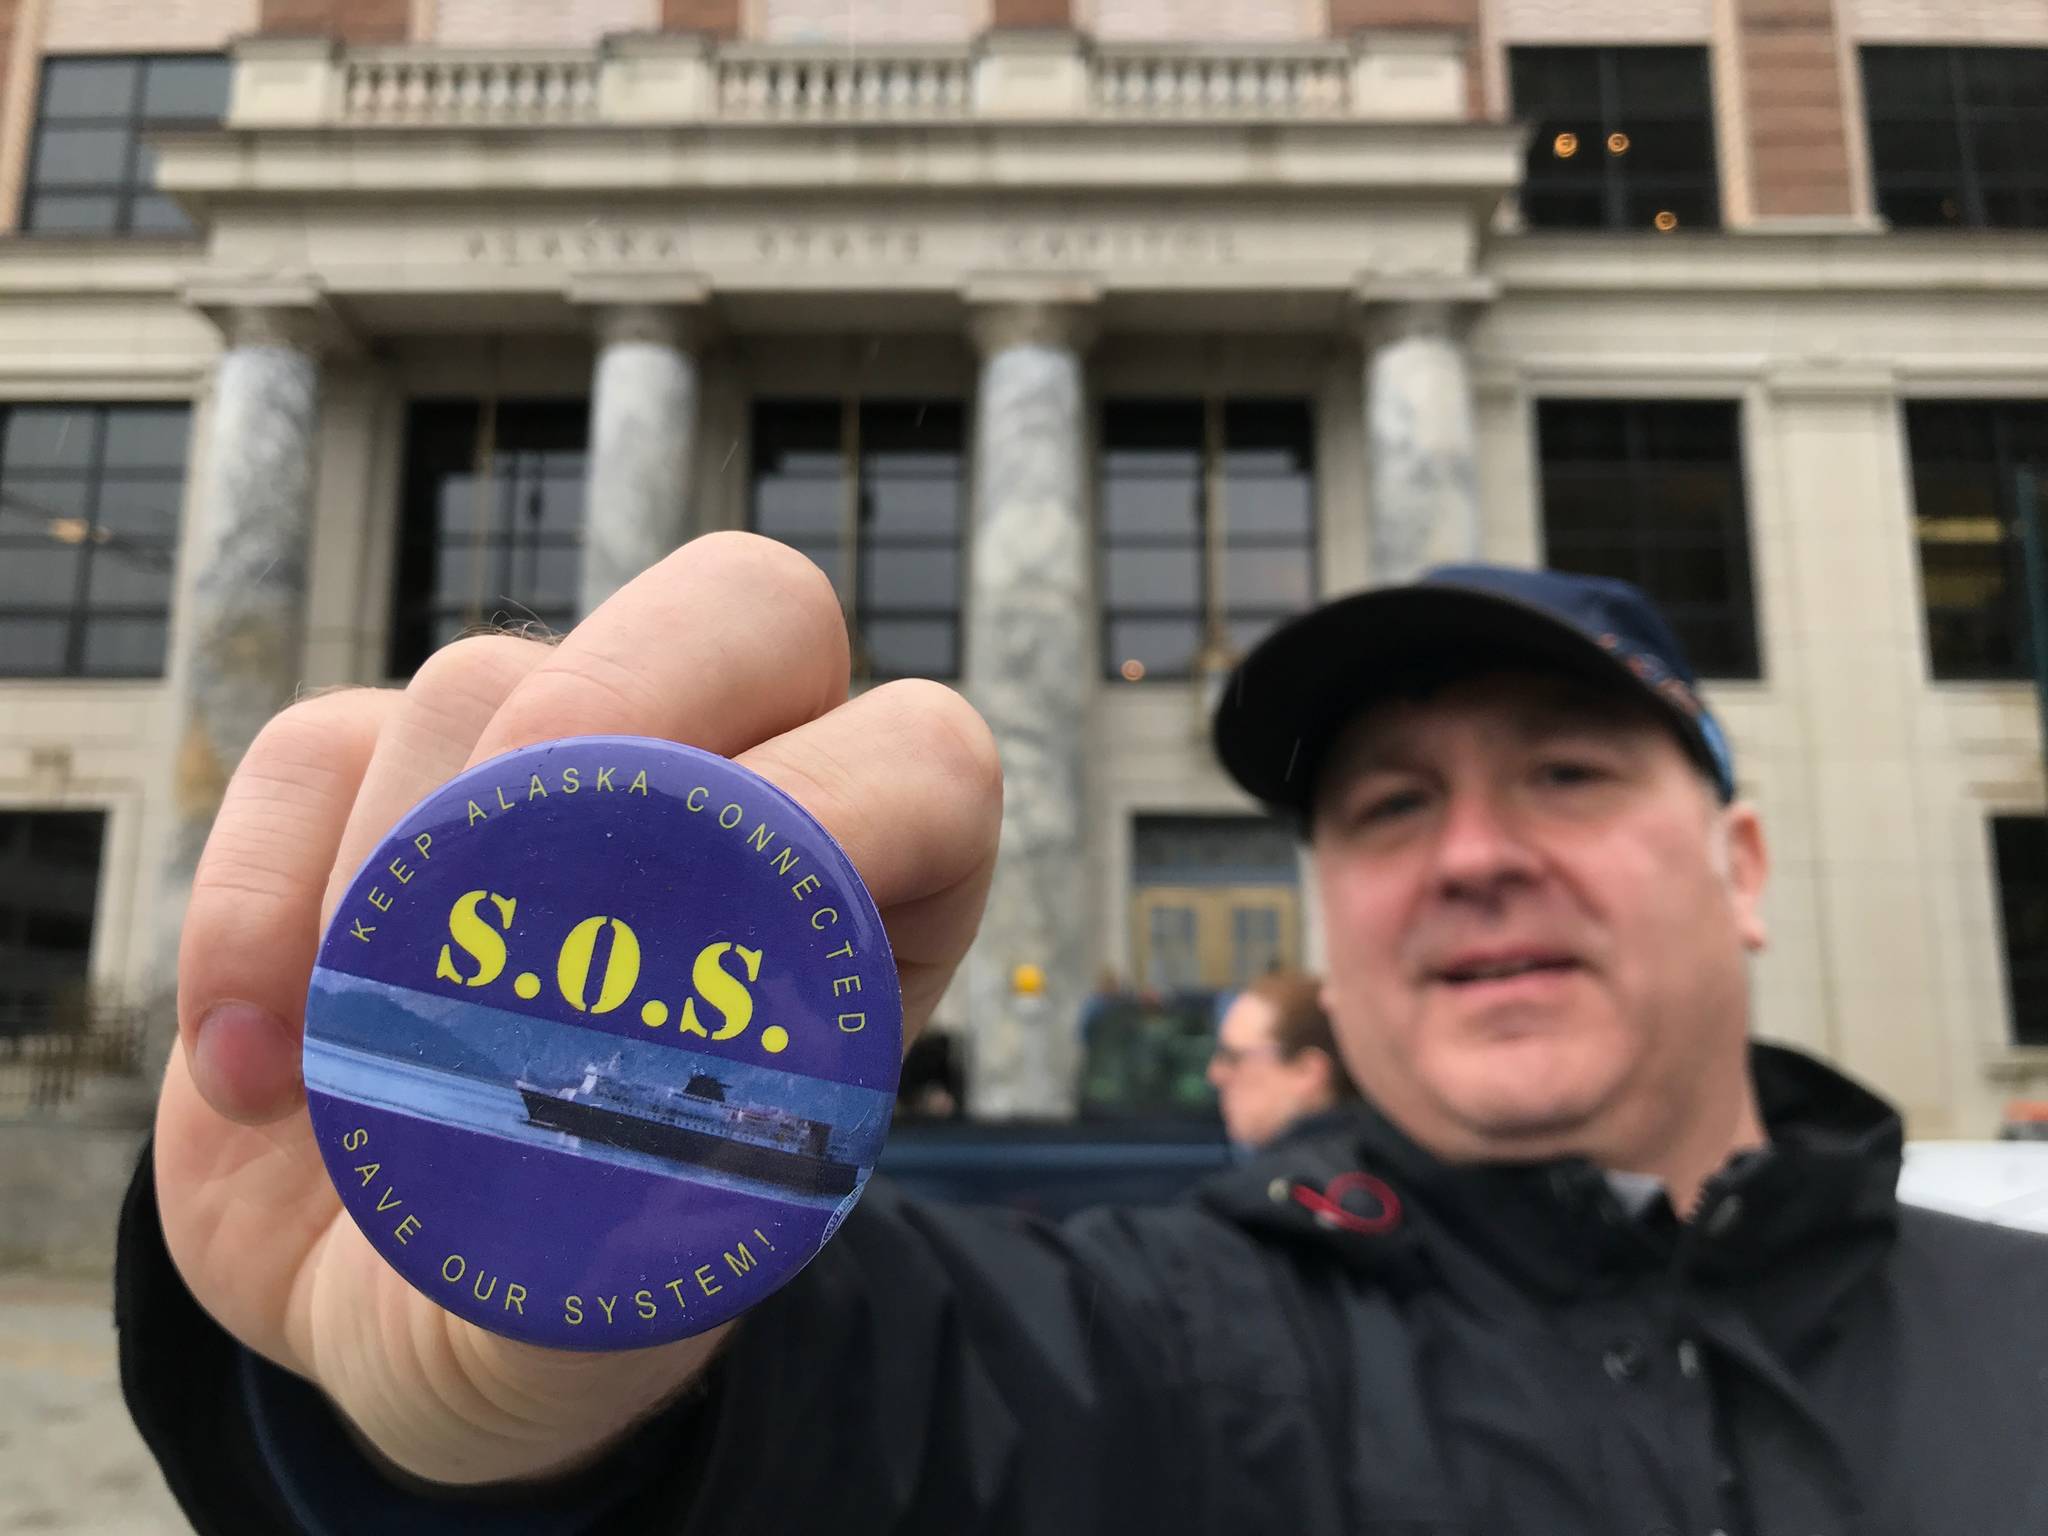 As final budget decisions approach, ferry supporters flood Capitol steps